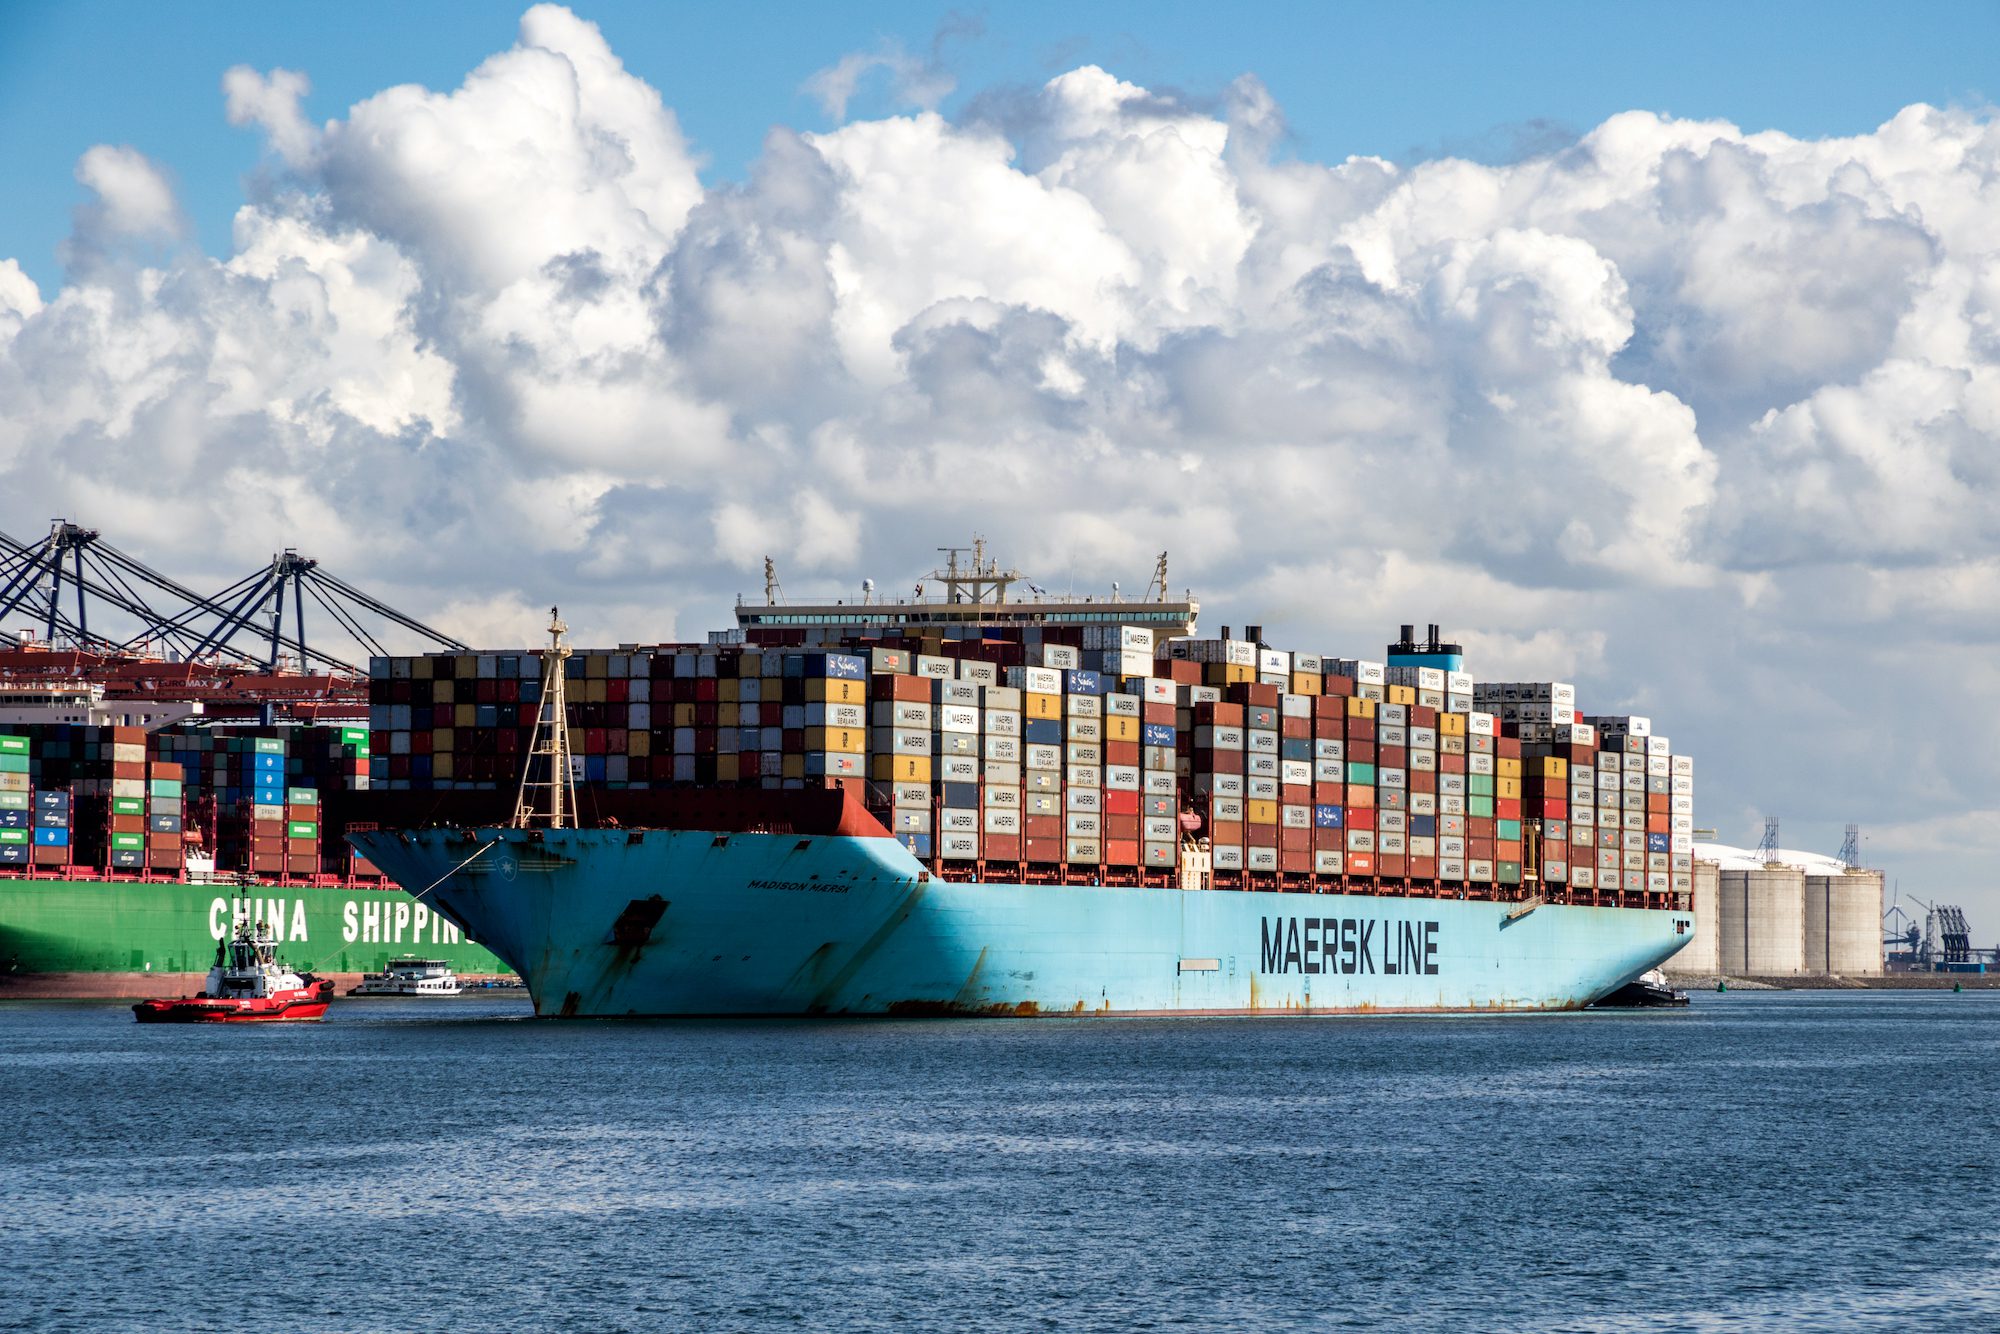 Fashion Industry Driving Demand for Green Shipping, Maersk Says